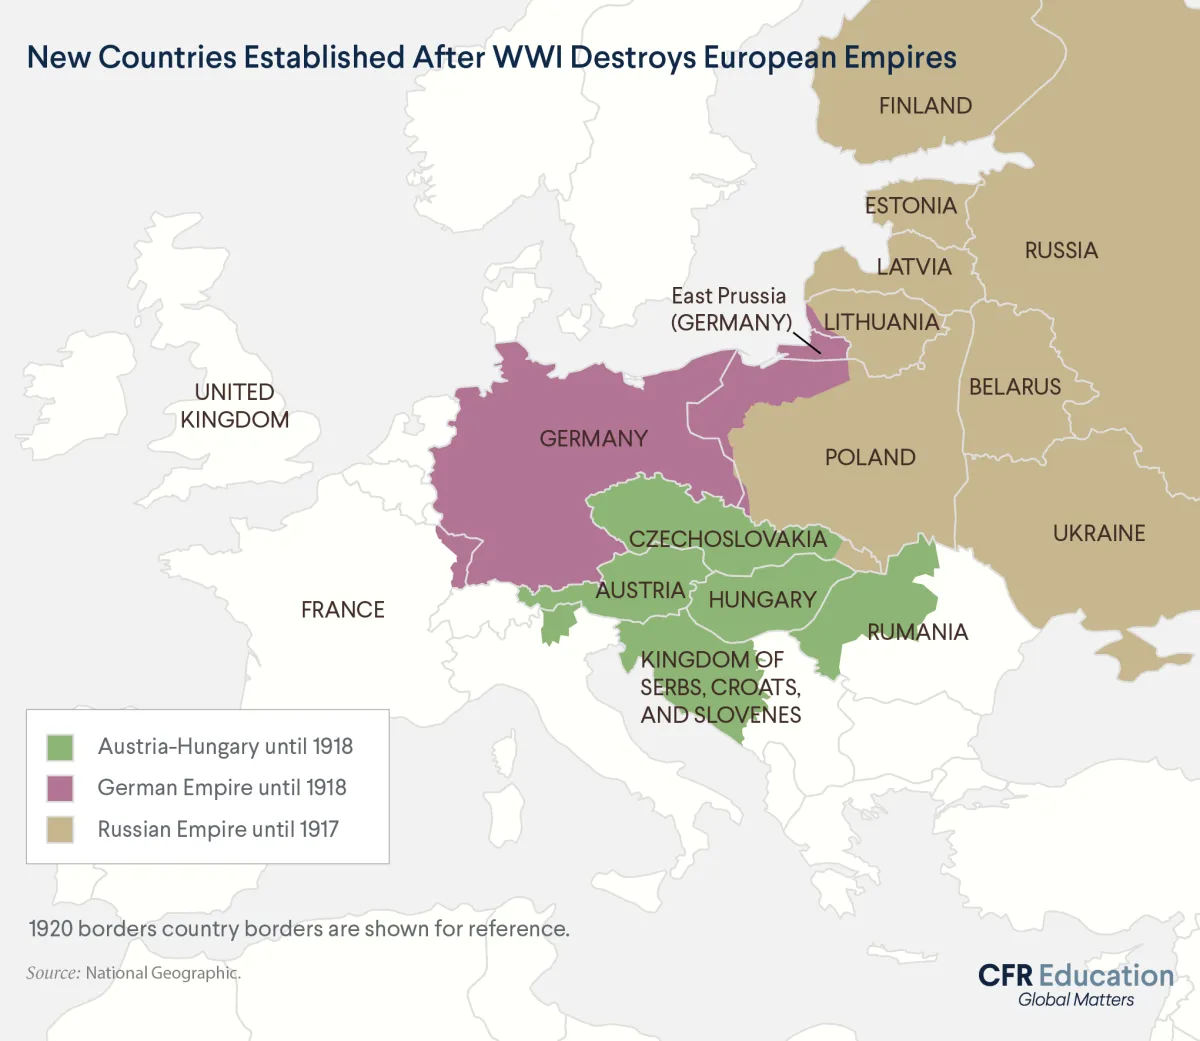 Map of new European countries that were established after World War One destroyed the Russian, German, and Austro-Hungarian empires. For more info contact us at cfr_education@cfr.org.